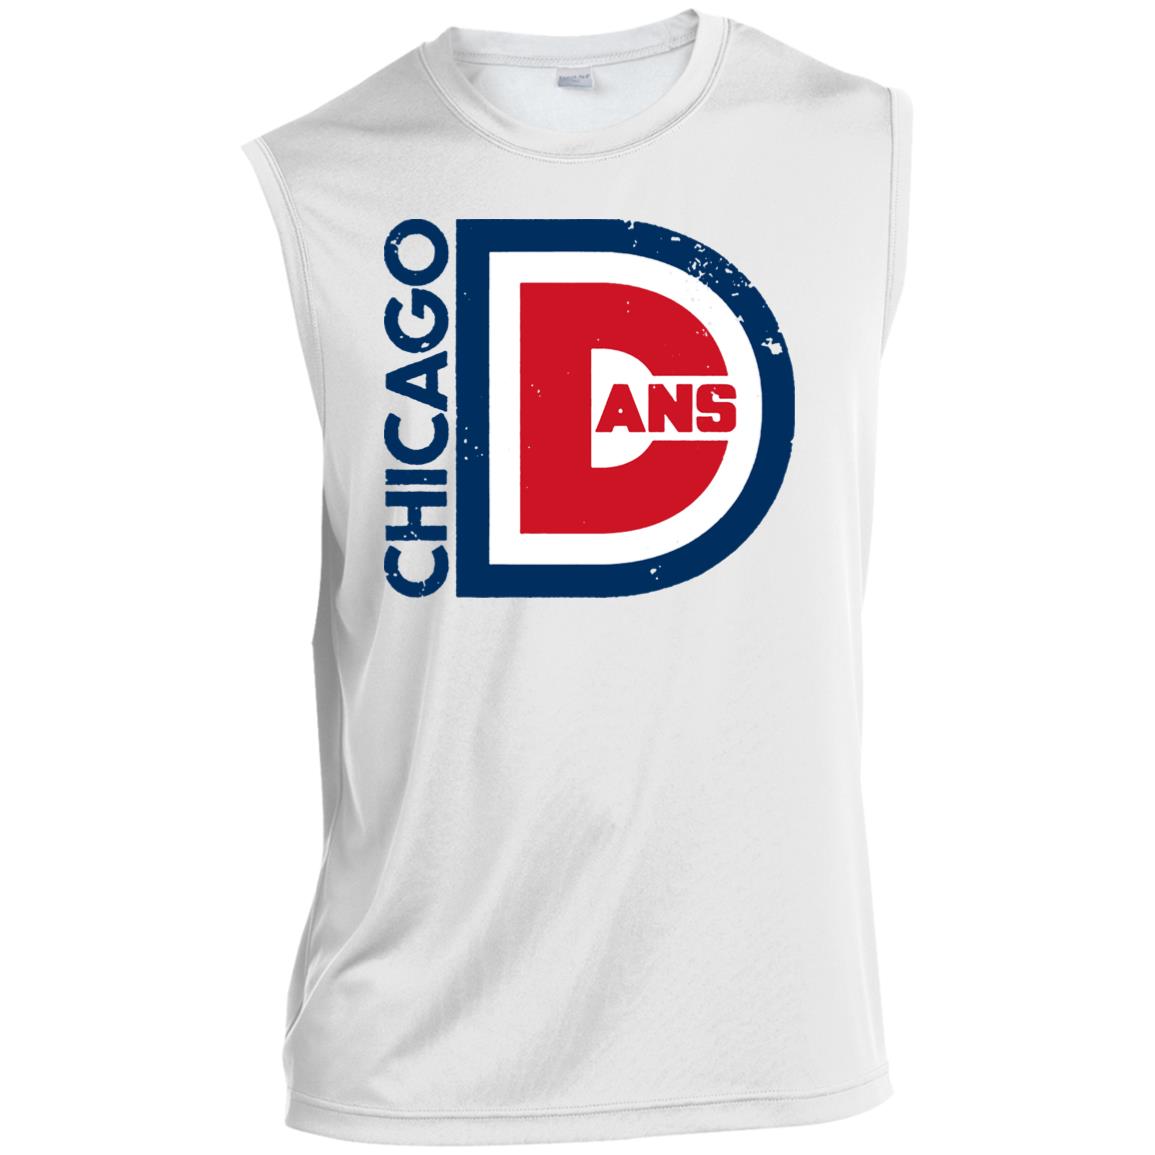 Dansby Swanson Chicago Cubs retro 90s Lightning shirt, hoodie, sweater,  long sleeve and tank top